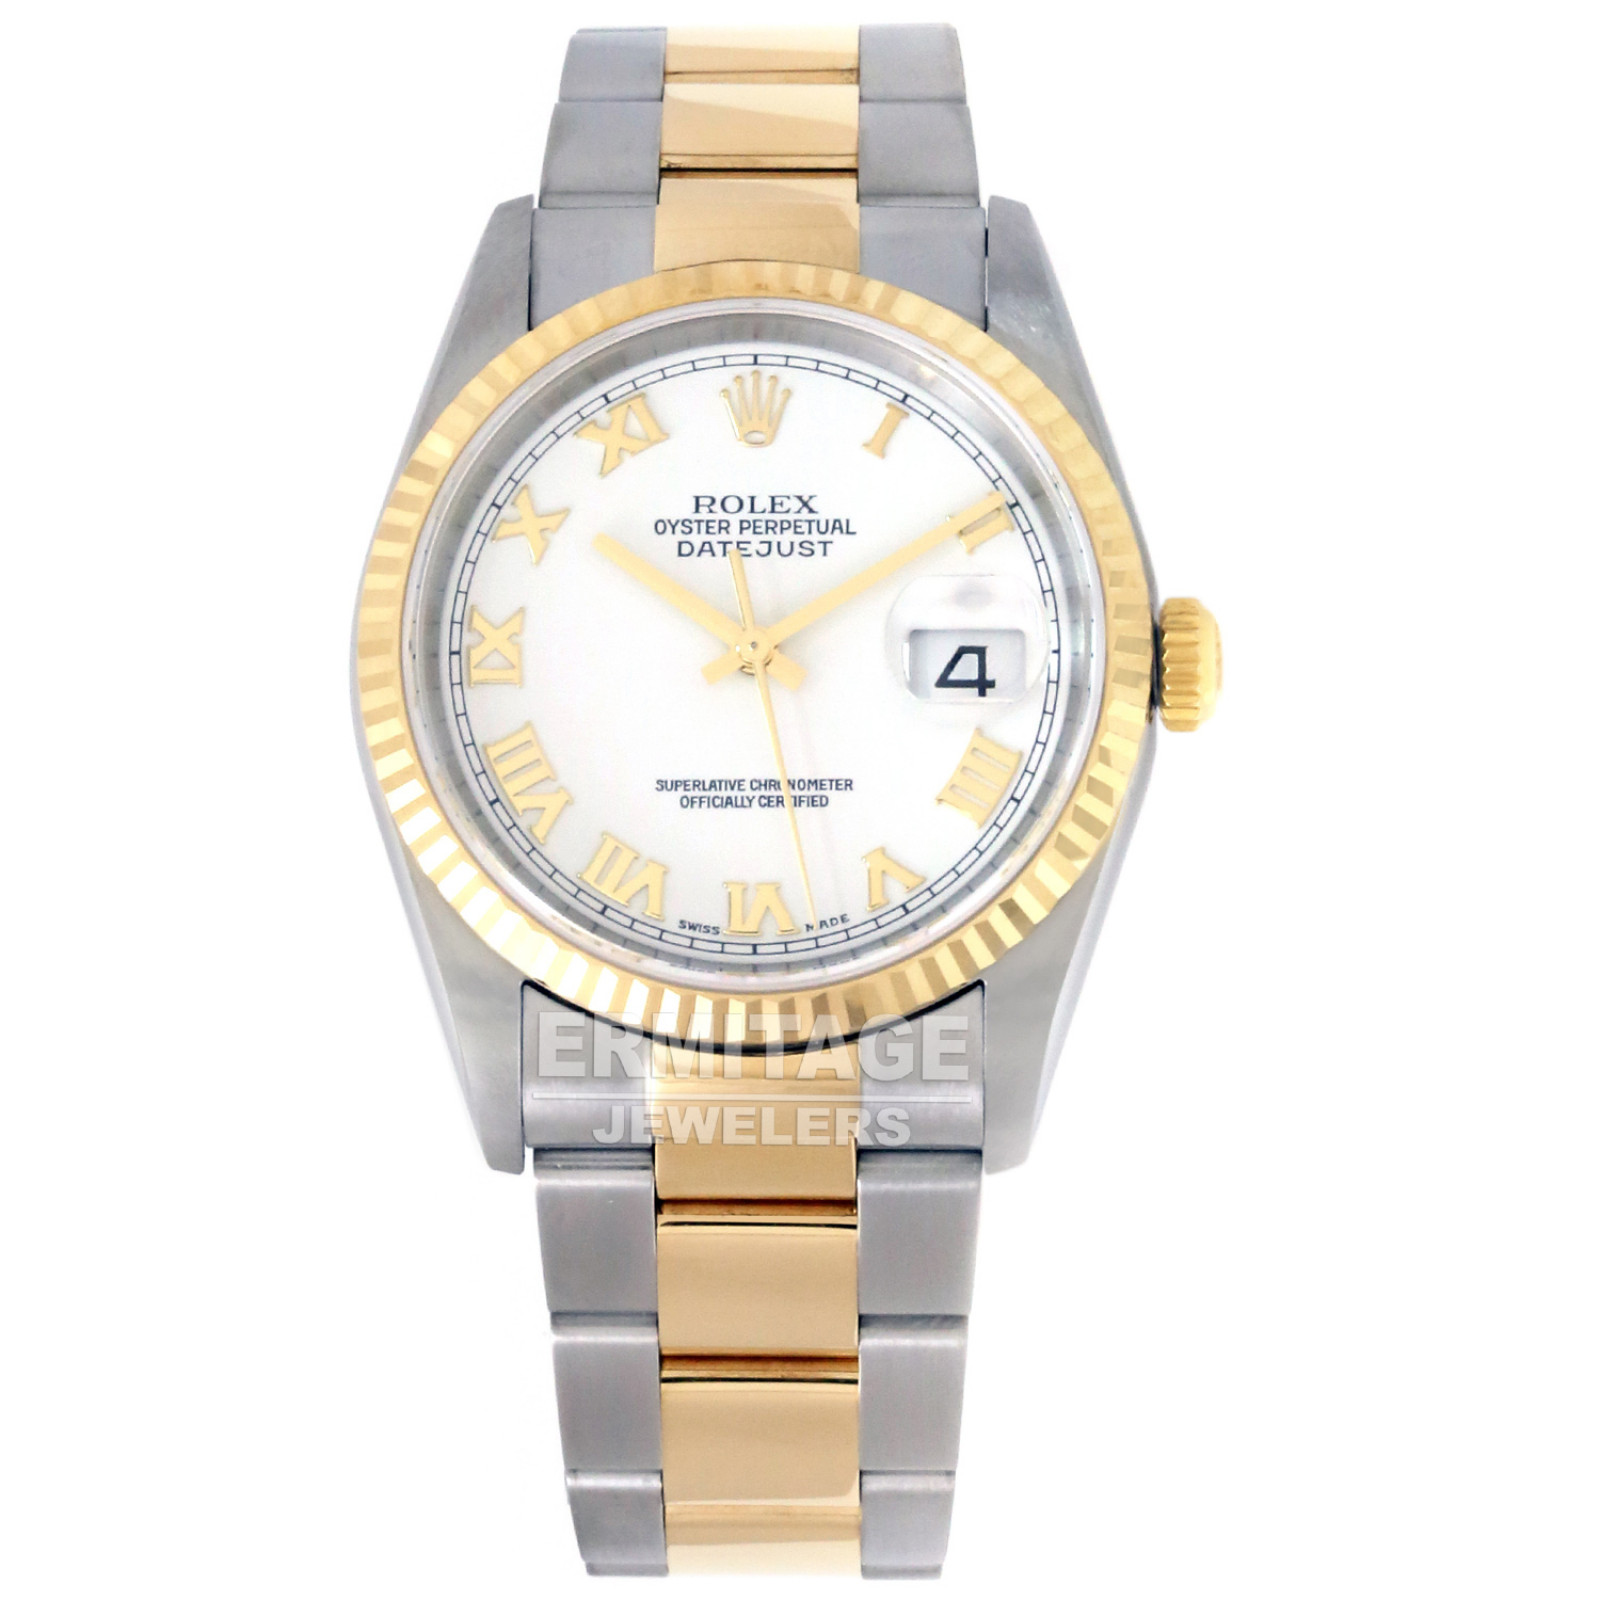 Pre-Owned Rolex Oyster Perpetual Datejust 16233 Gold & Steel